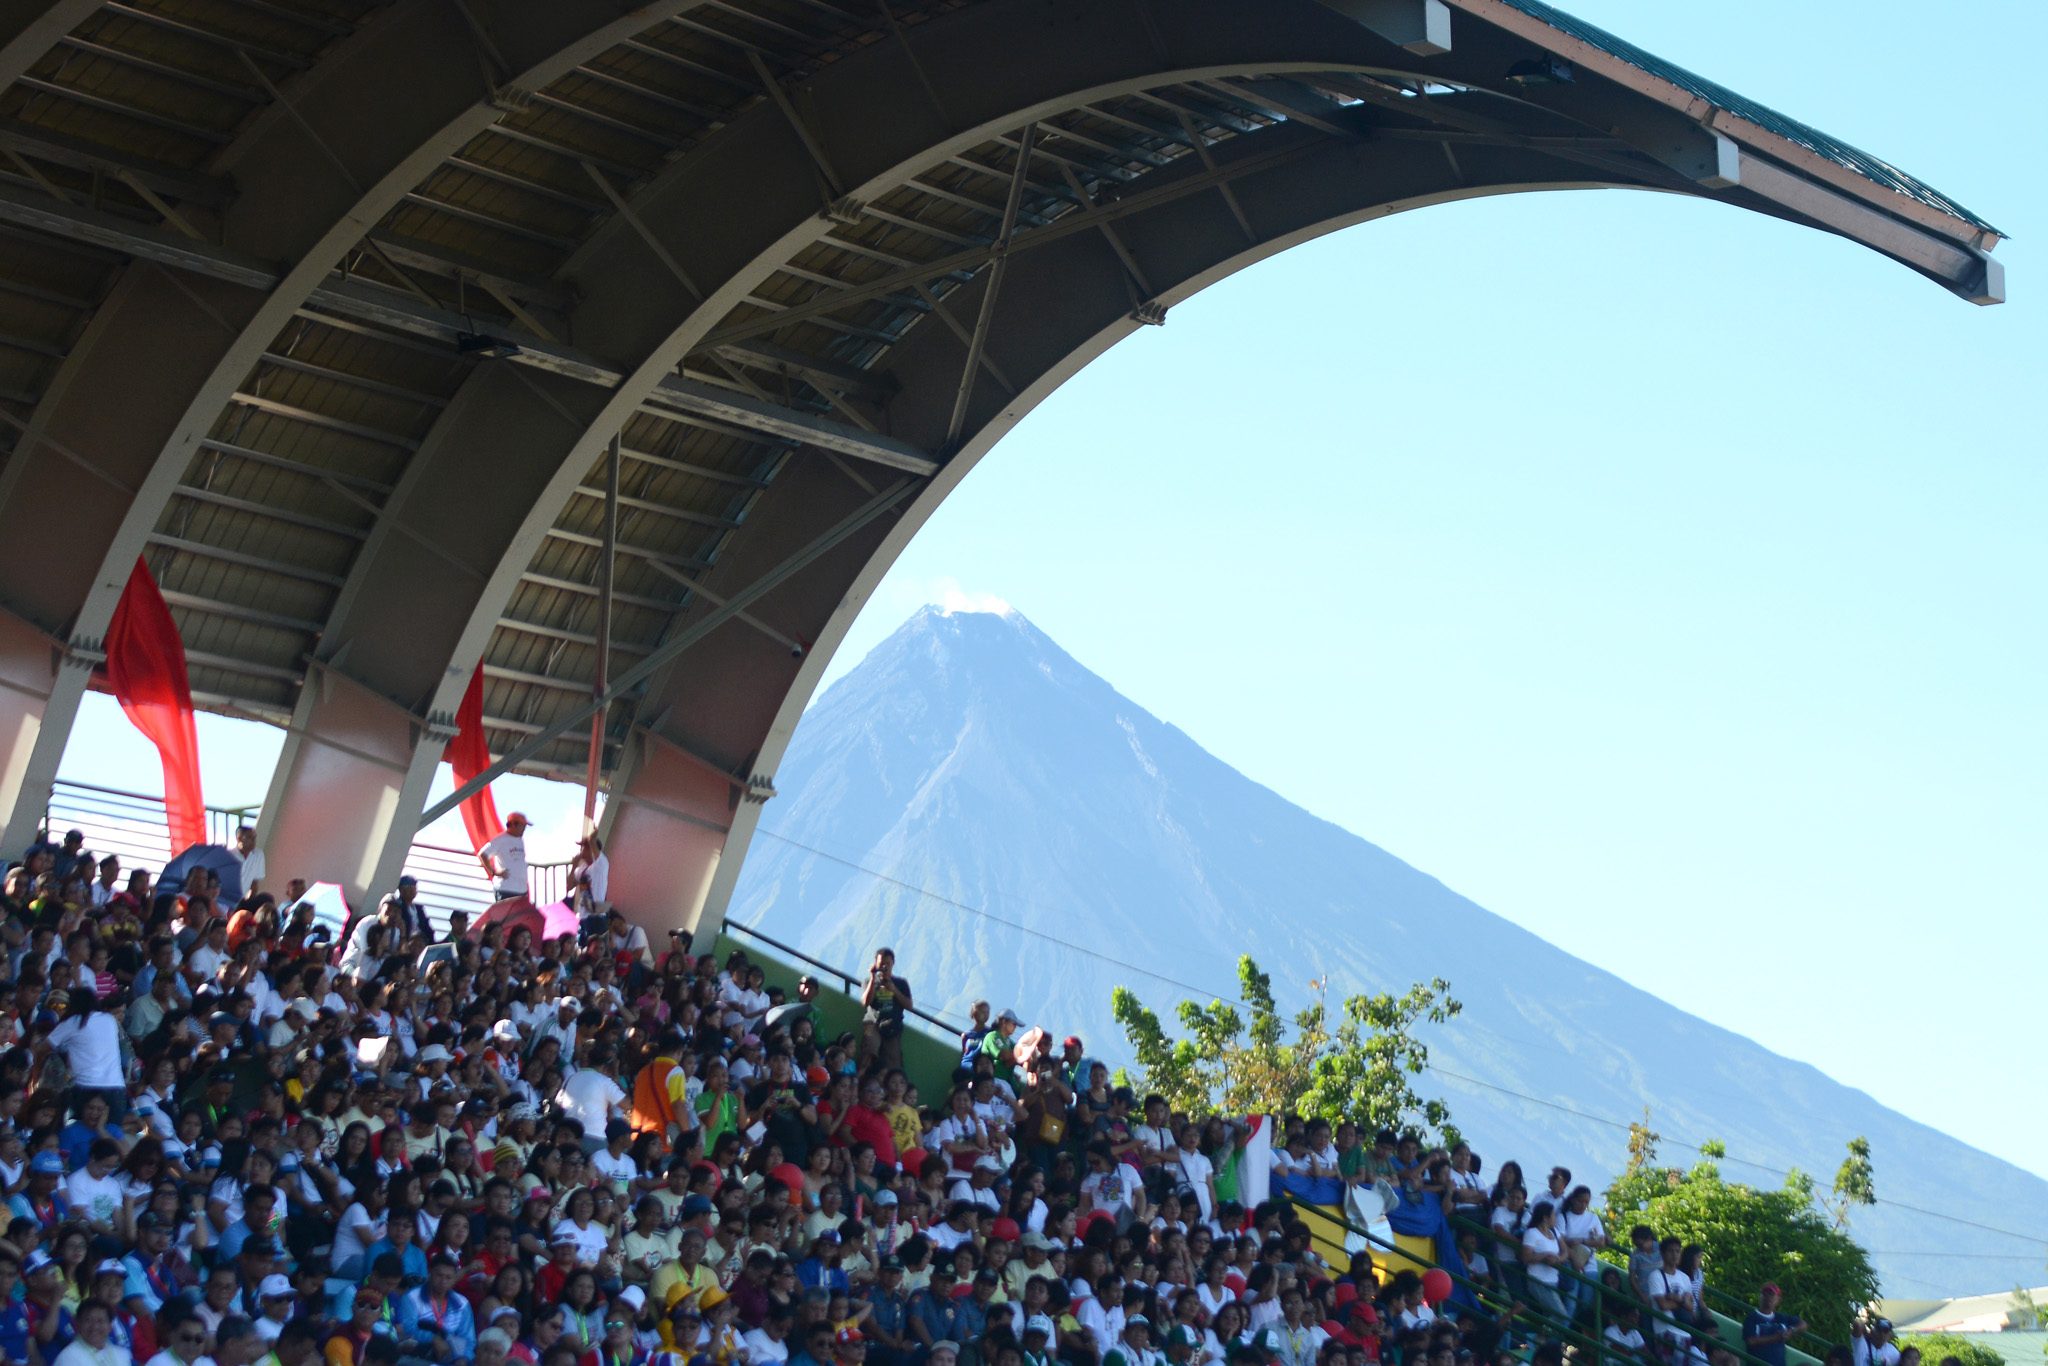 MAYON. A clear view of the Mayon Volcano greets delegates at the ceremony. Photo by Roy Secretario/ Rappler 